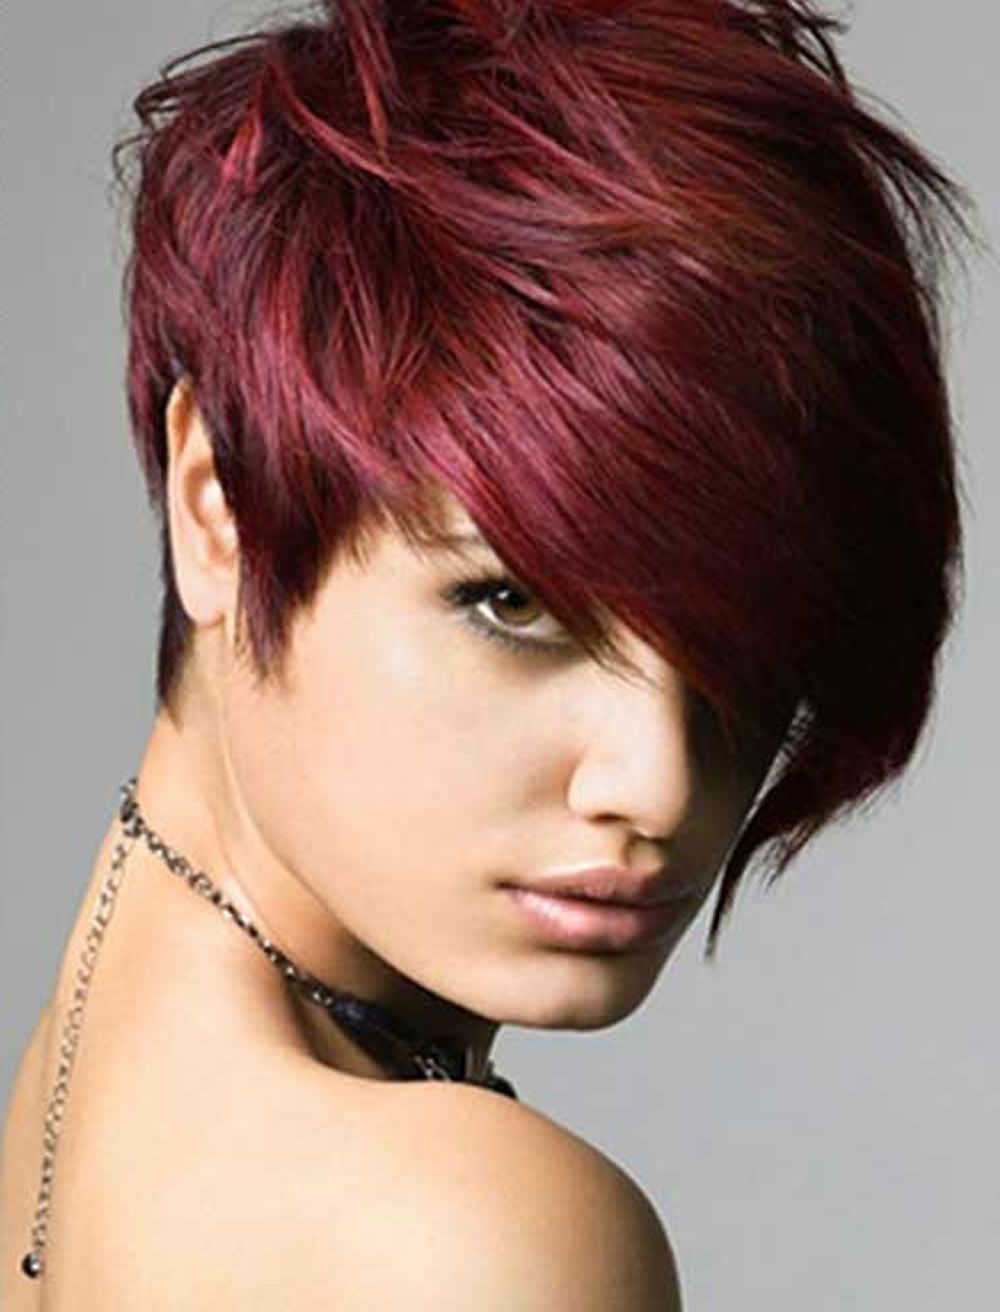 Red Hair Color For Short Hairstyles | 27 Cool Haircut Tutorial For Intended For Red Short Hairstyles (View 2 of 25)